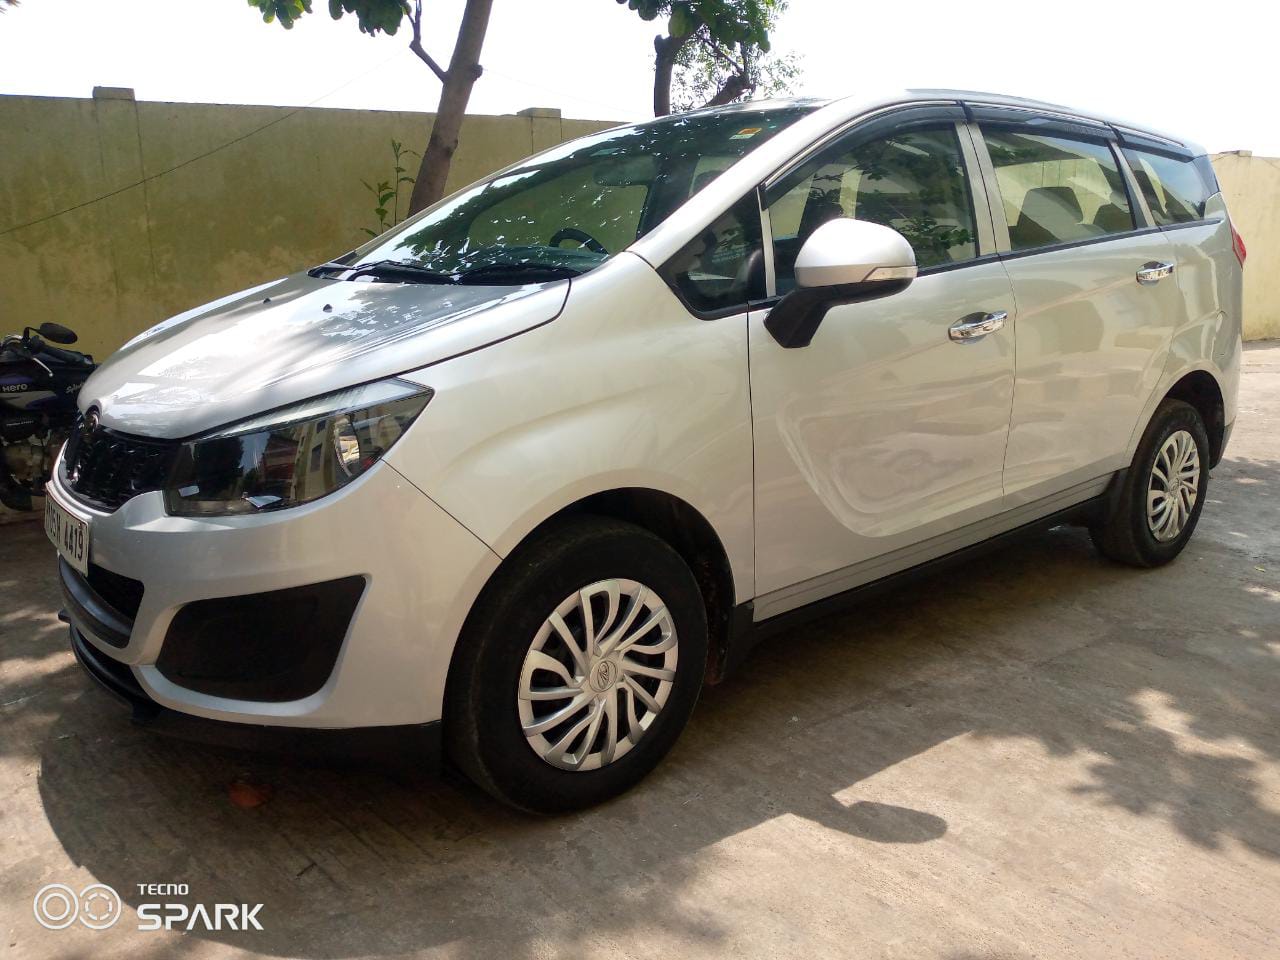 3687-for-sale-Mahindra-Marazzo-Diesel-First-Owner-2019-PY-registered-rs-894999